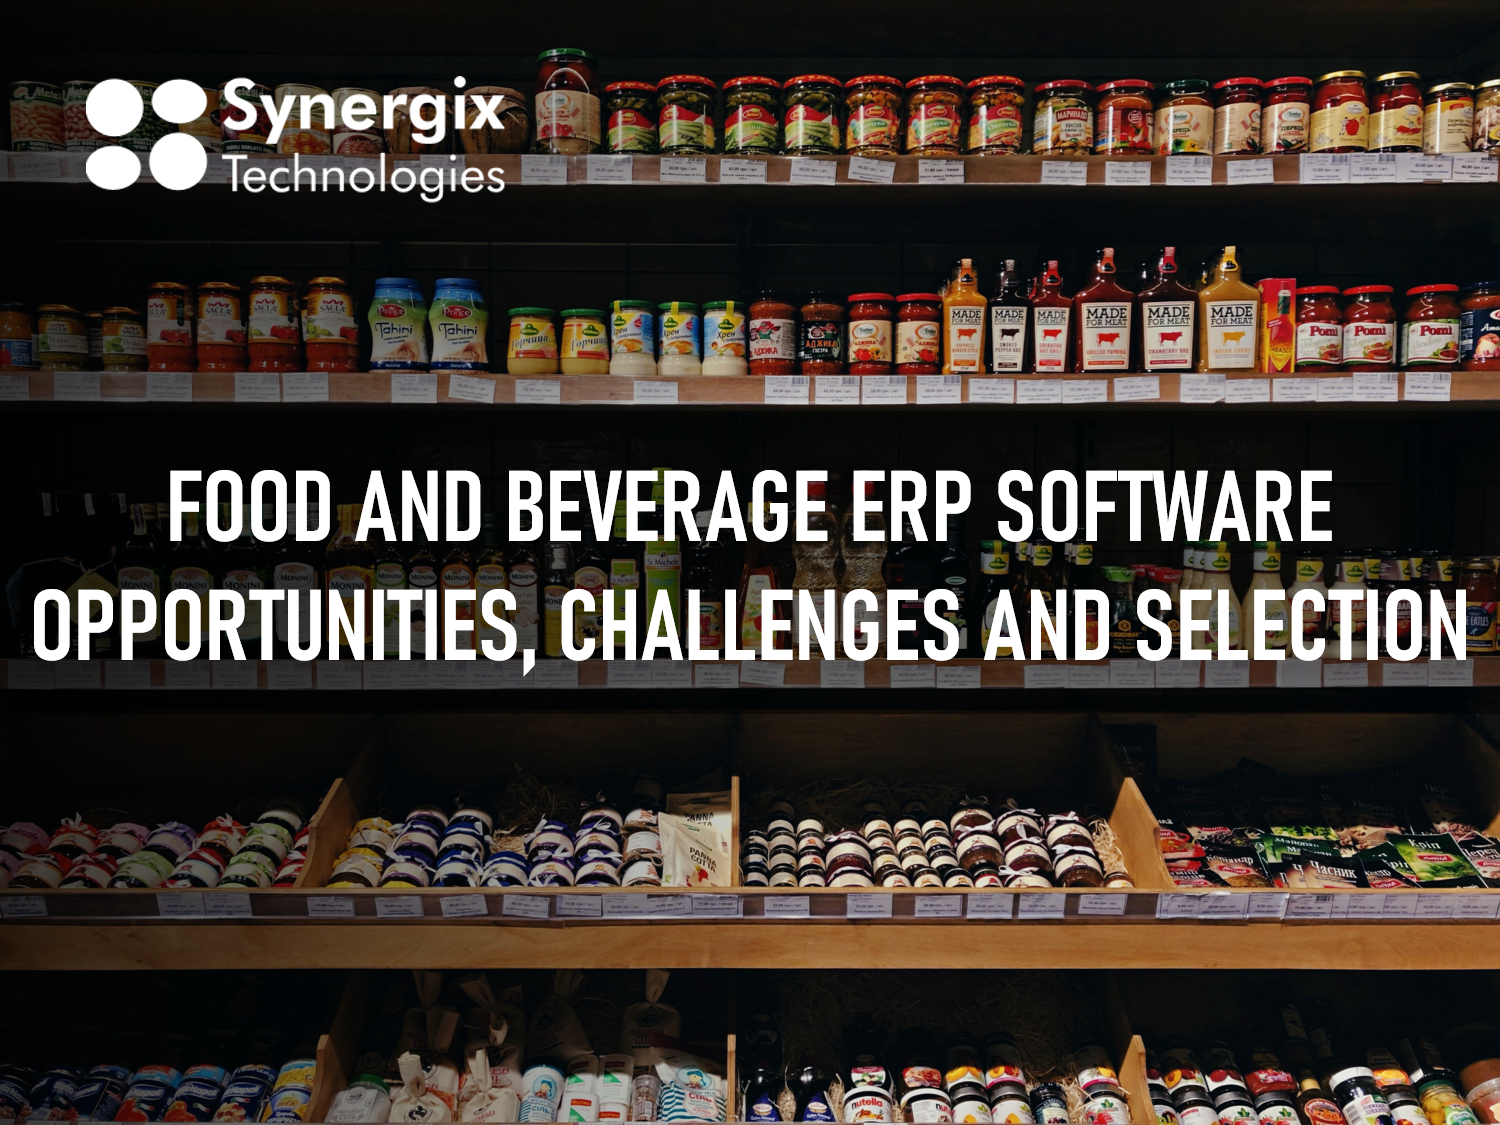 Food And Beverage ERP Software - Opportunities, Challenges And Selection